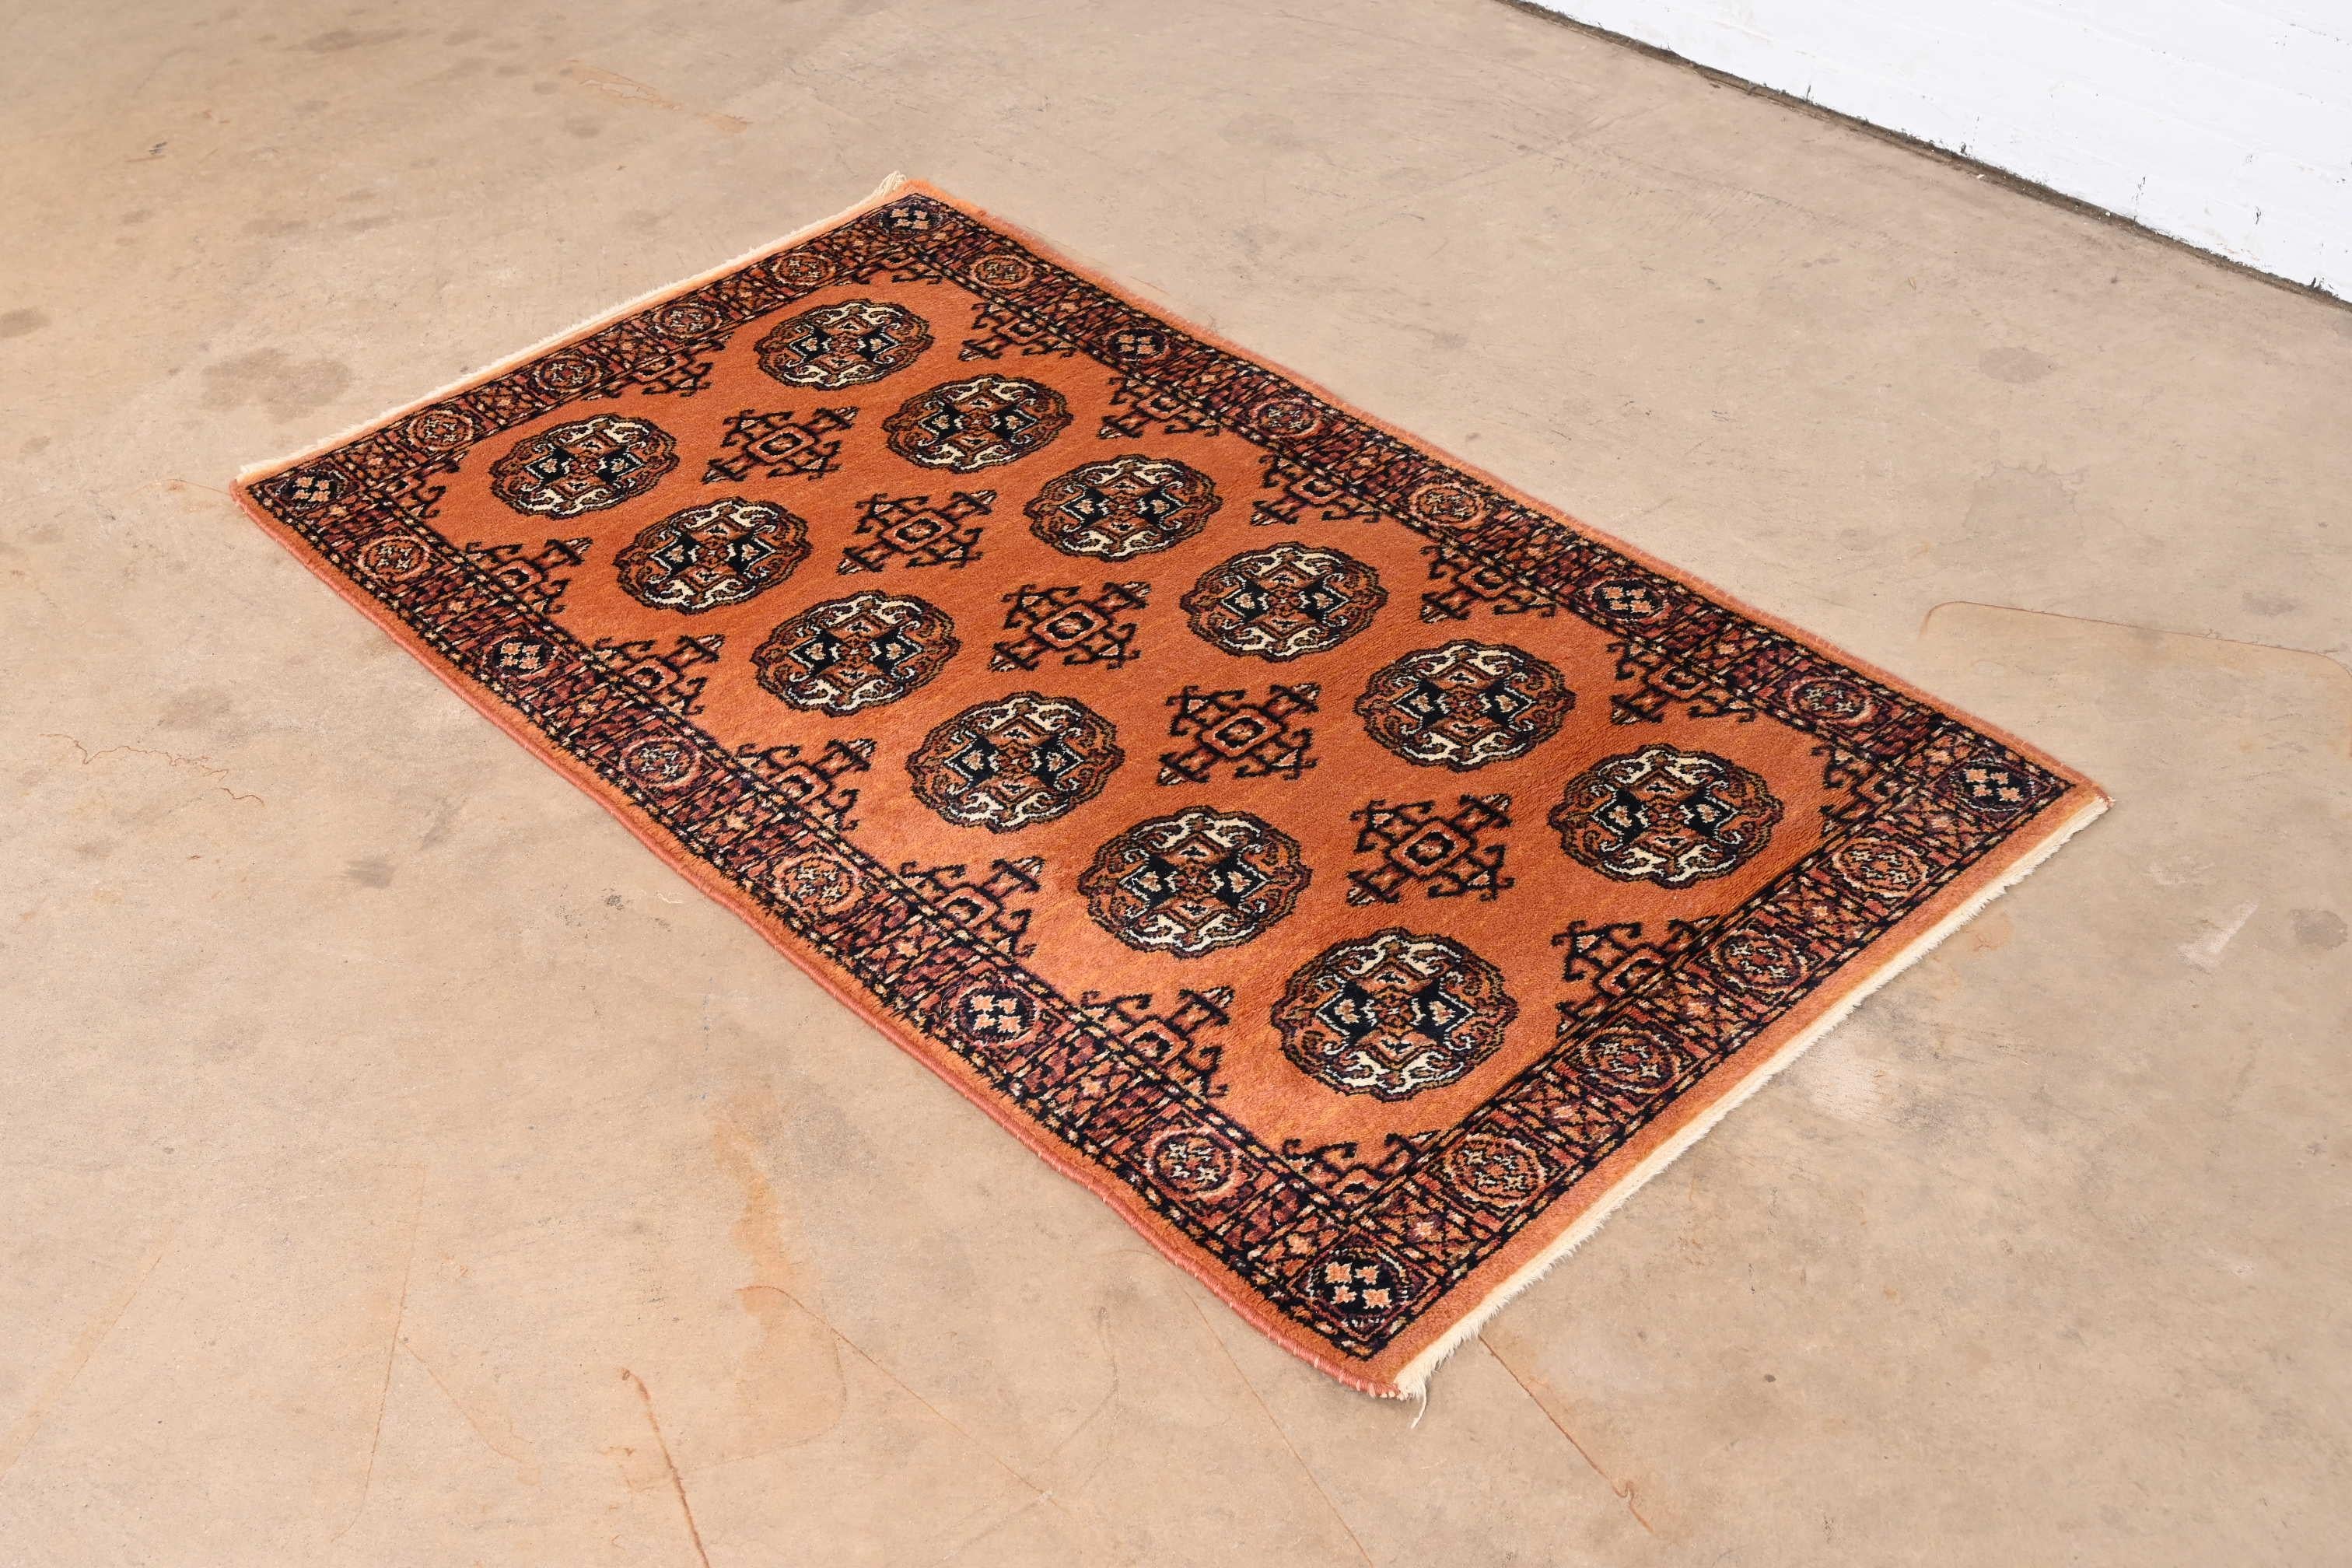 A gorgeous Persian Bokhara style wool rug

By Karastan

USA, Mid-20th century

Beautiful geometric design, with predominant colors in orange, brown, black, and ivory.

Measures: 34